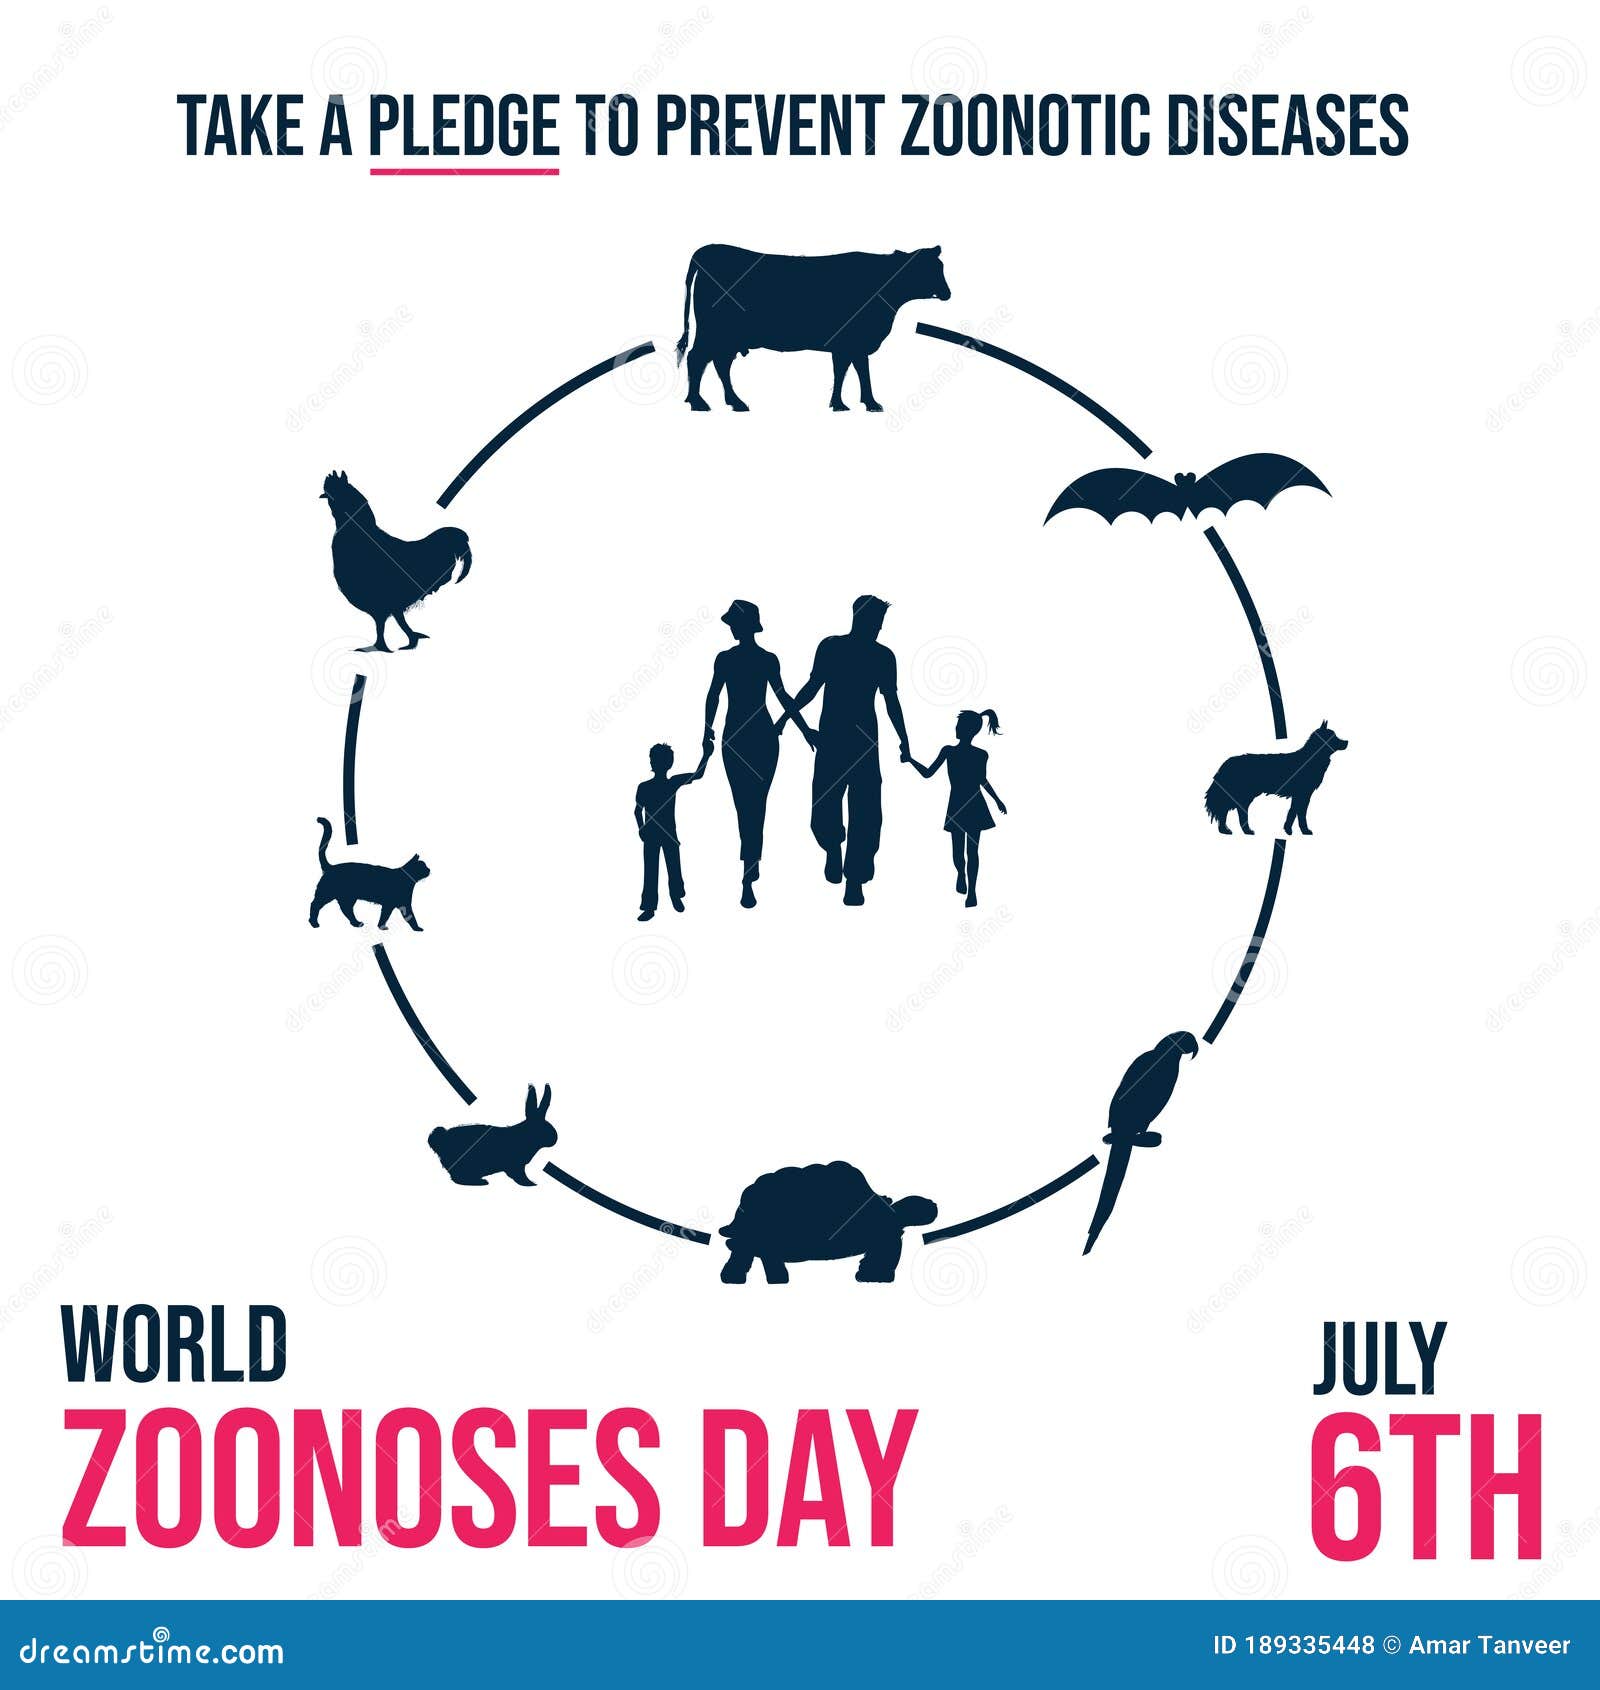 world zoonoses day, take a pledge to prevent zoonotic diseases poster,  